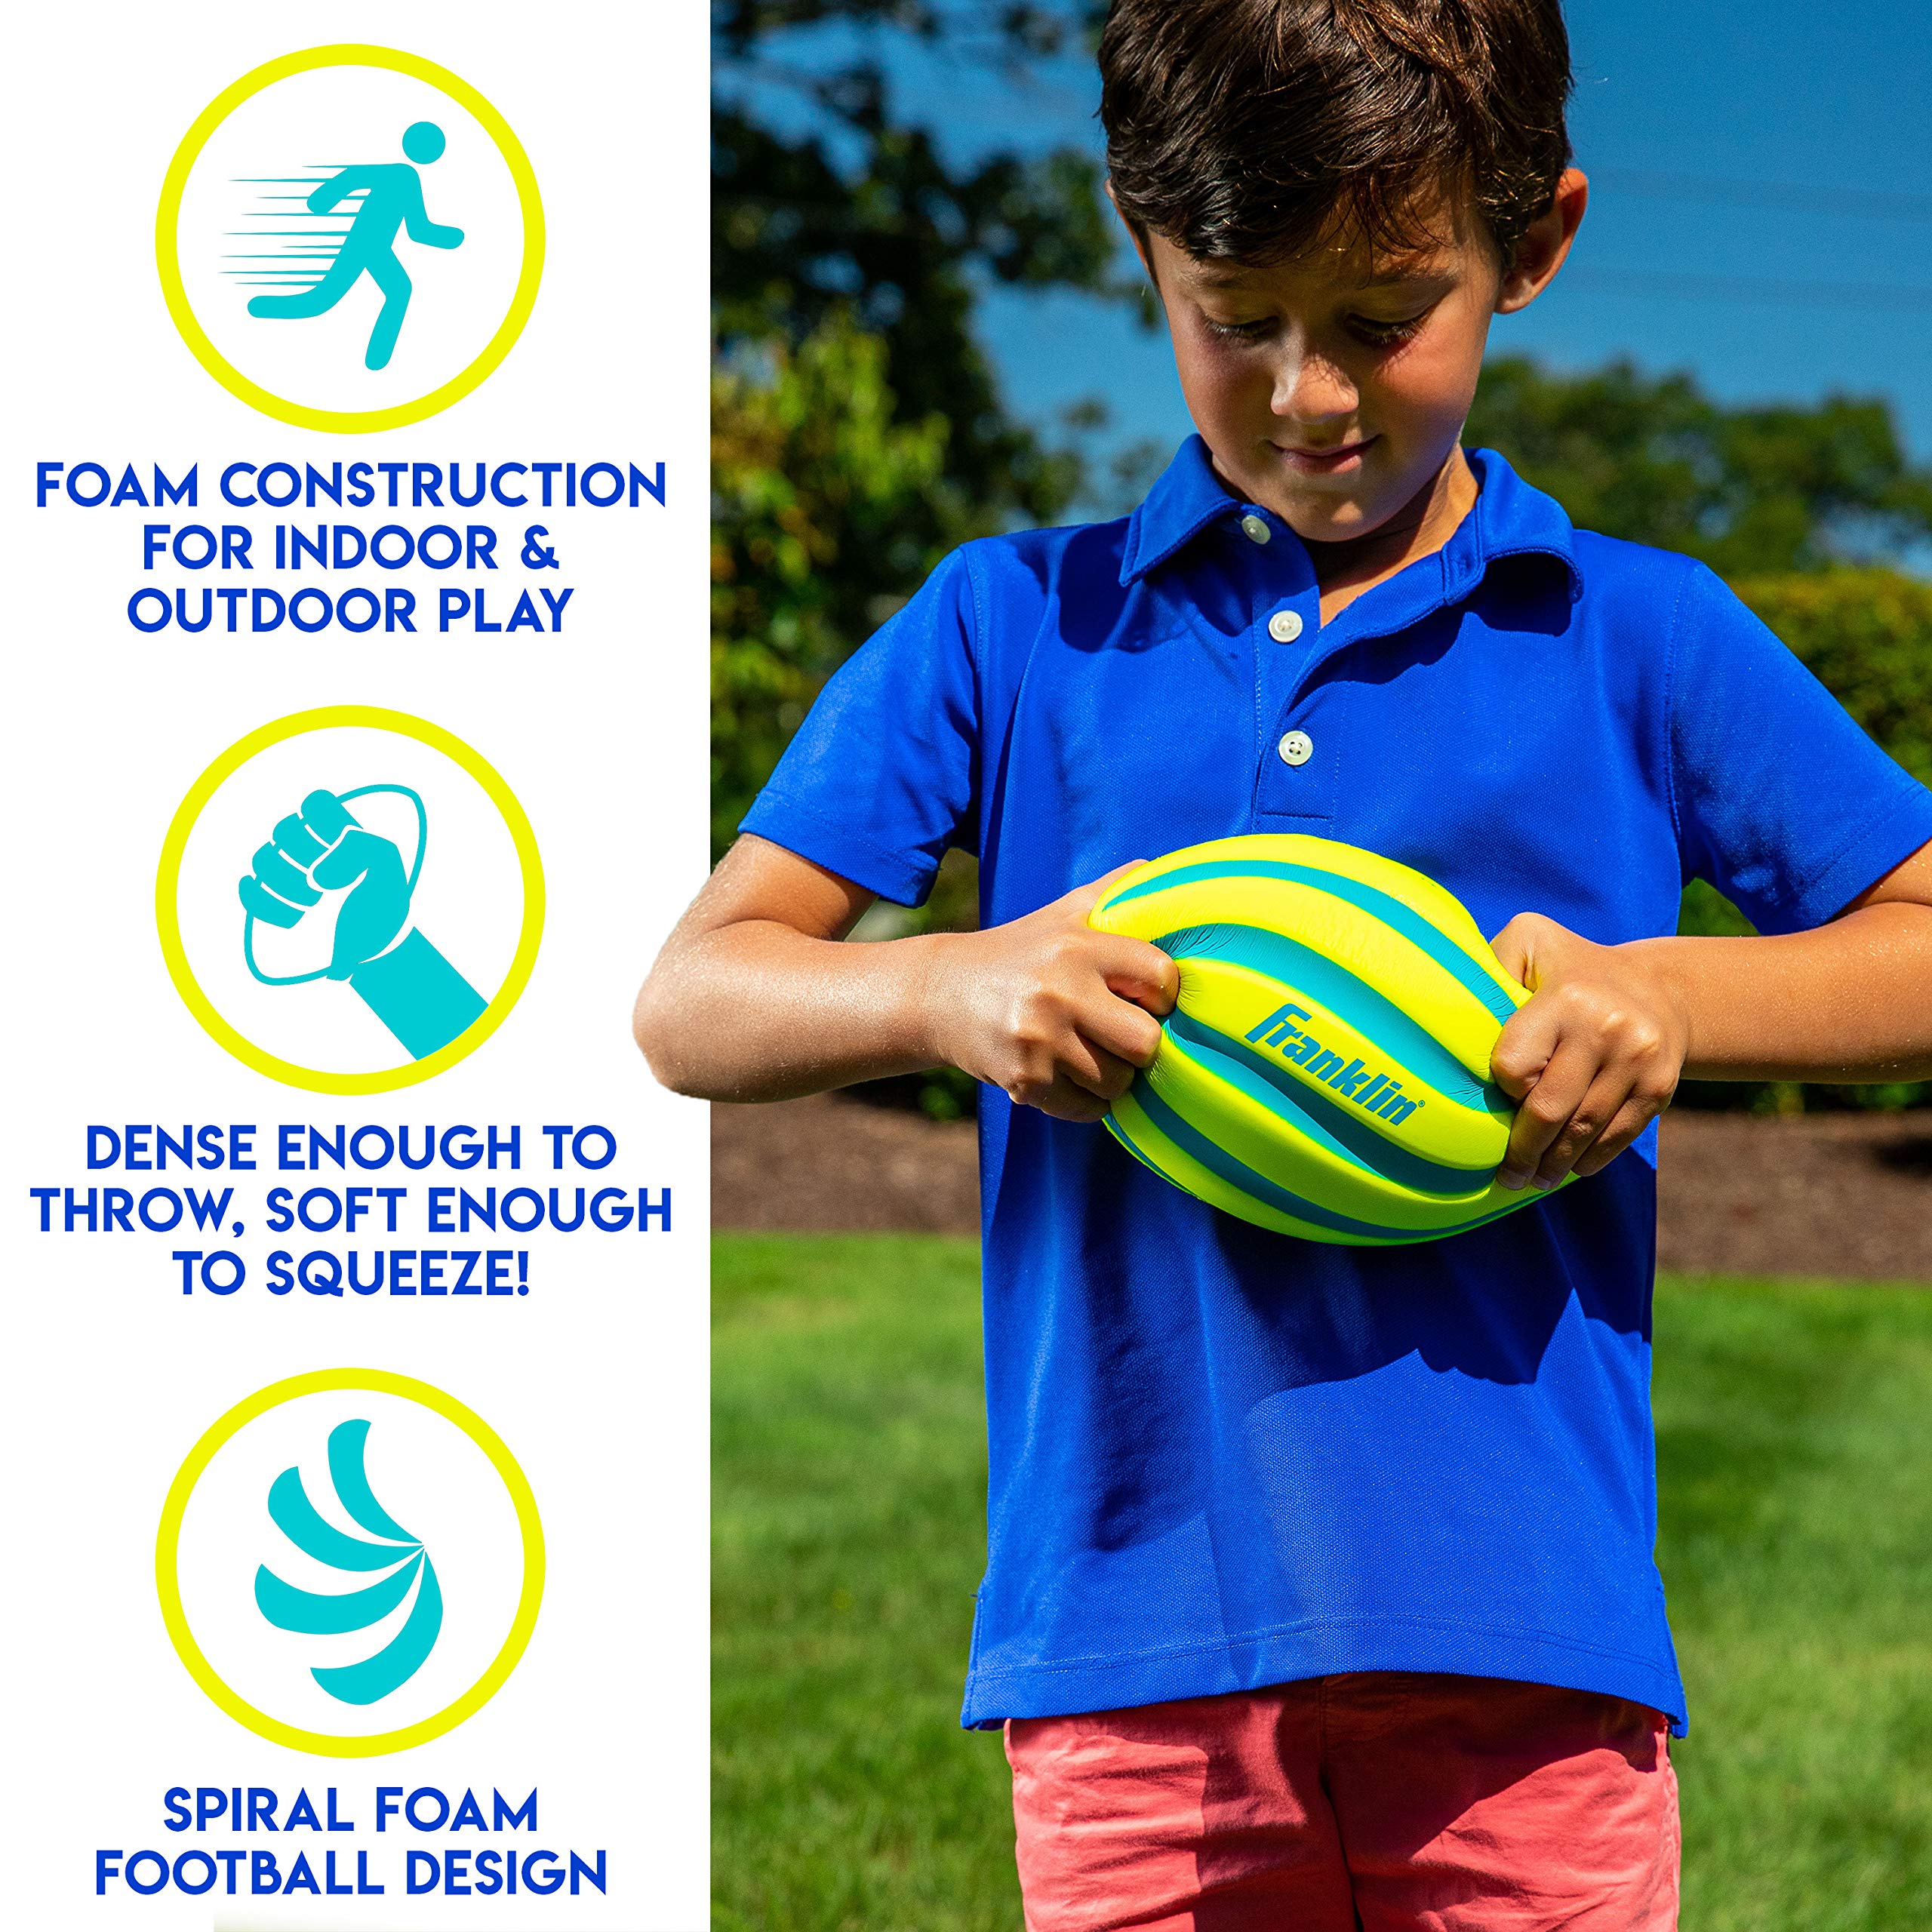 Franklin Sports Foam Football - Perfect for Practice and Backyard Play - Best for First-Time Play and Small Kids - Spiral Footba